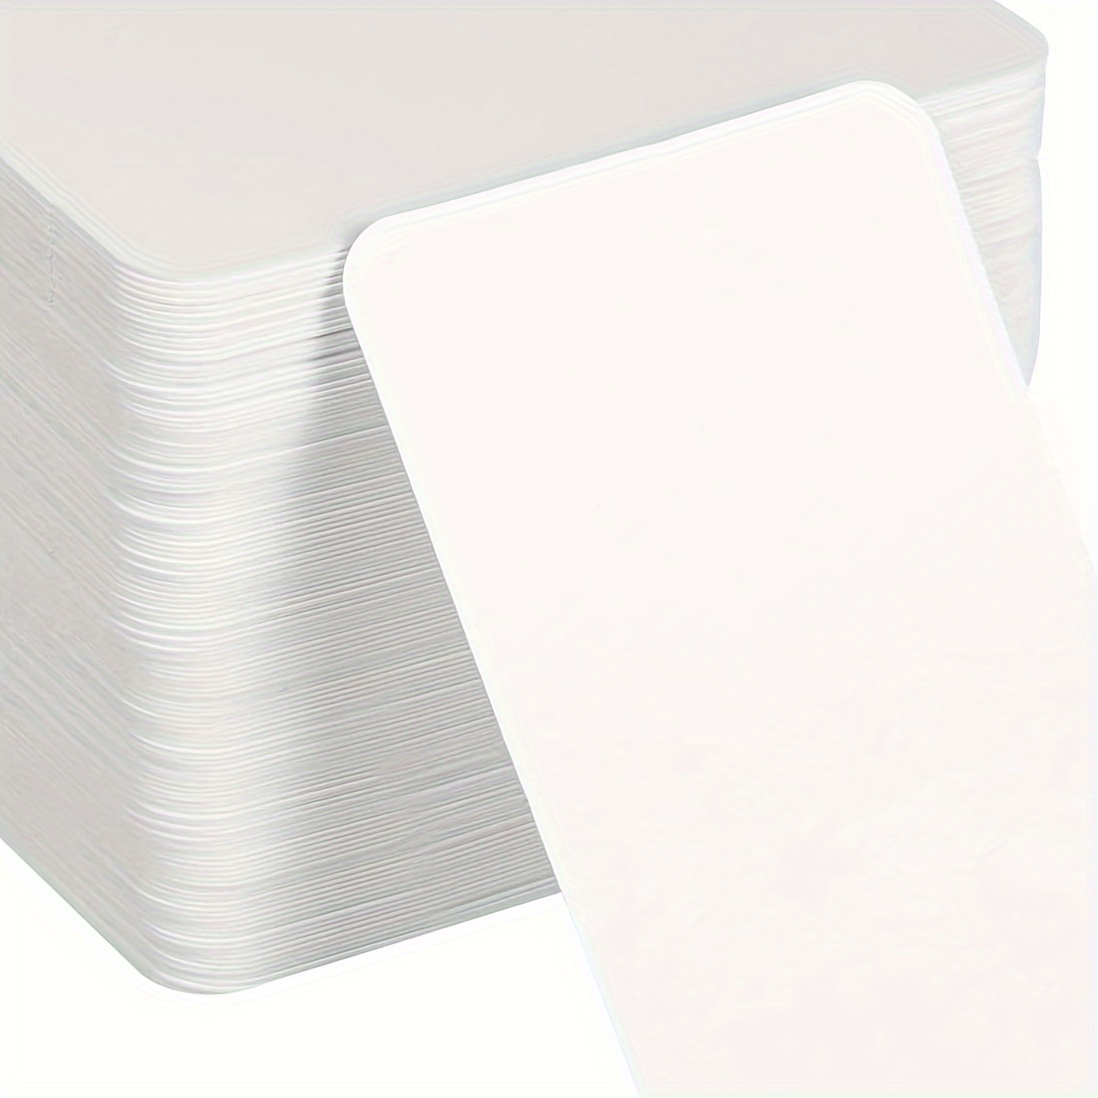 

200pcs Blank Index Cards, Blank Paper Cards, Presentation Cards, White Cards For Diy, School And Office Learning Supplies